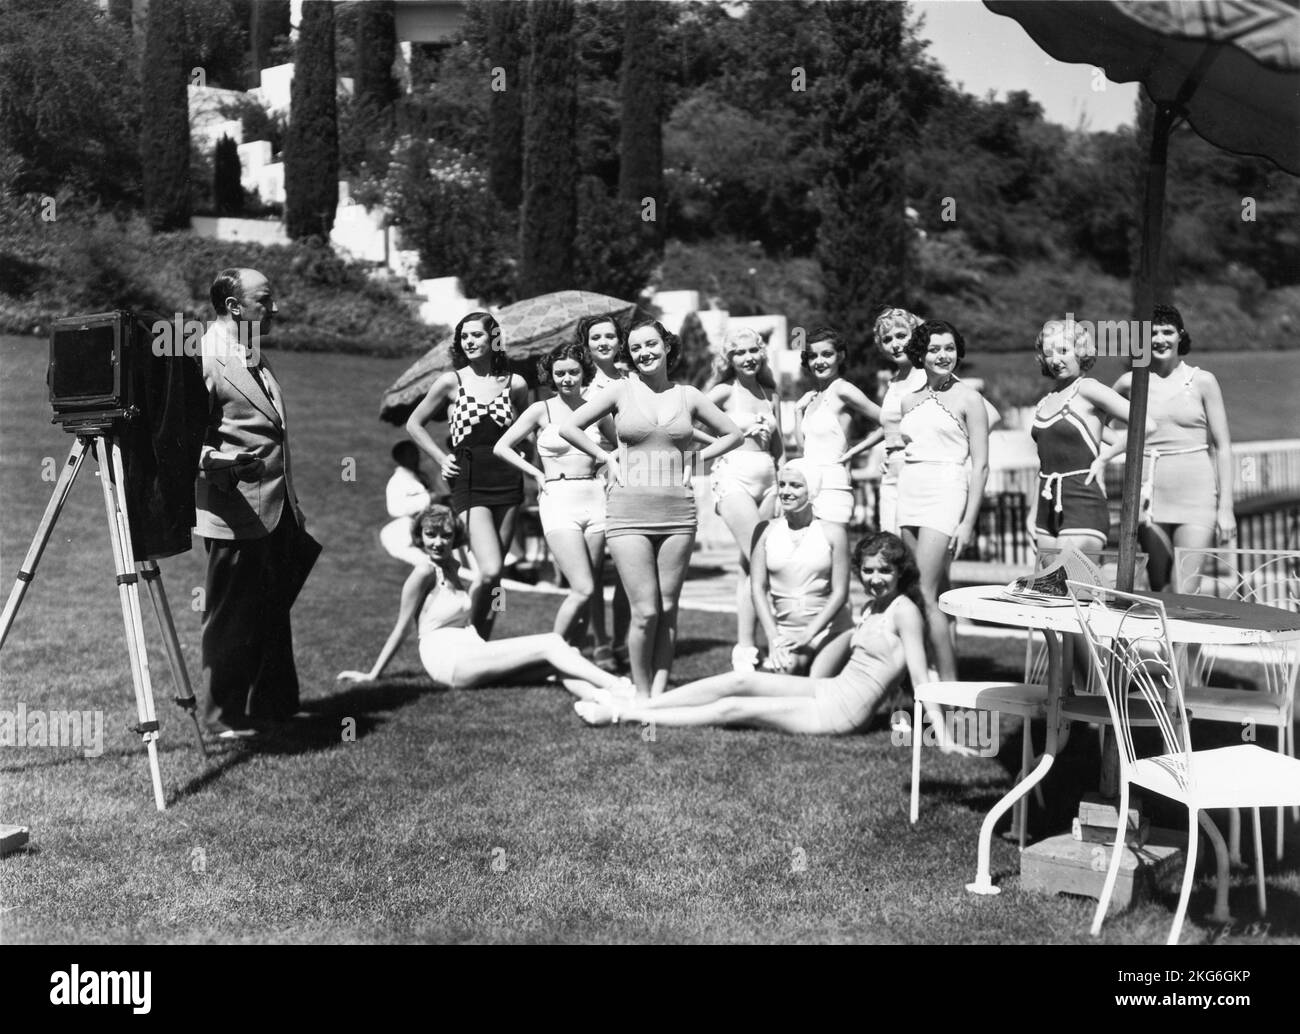 JUDITH ALLEN and WAMPAS Baby Stars of 1934 (including LUCILLE LUND and JACQUELINE WELLS / later JULIE BISHOP who both appeared in THE BLACK CAT with Boris Karloff and Bela Lugosi) pose in swimsuits for Still Cameraman in YOUNG AND BEAUTIFUL 1934 director JOSEPH SANTLEY screenplay and dialogue Dore Schary producer Nat Levine Mascot Pictures Stock Photo